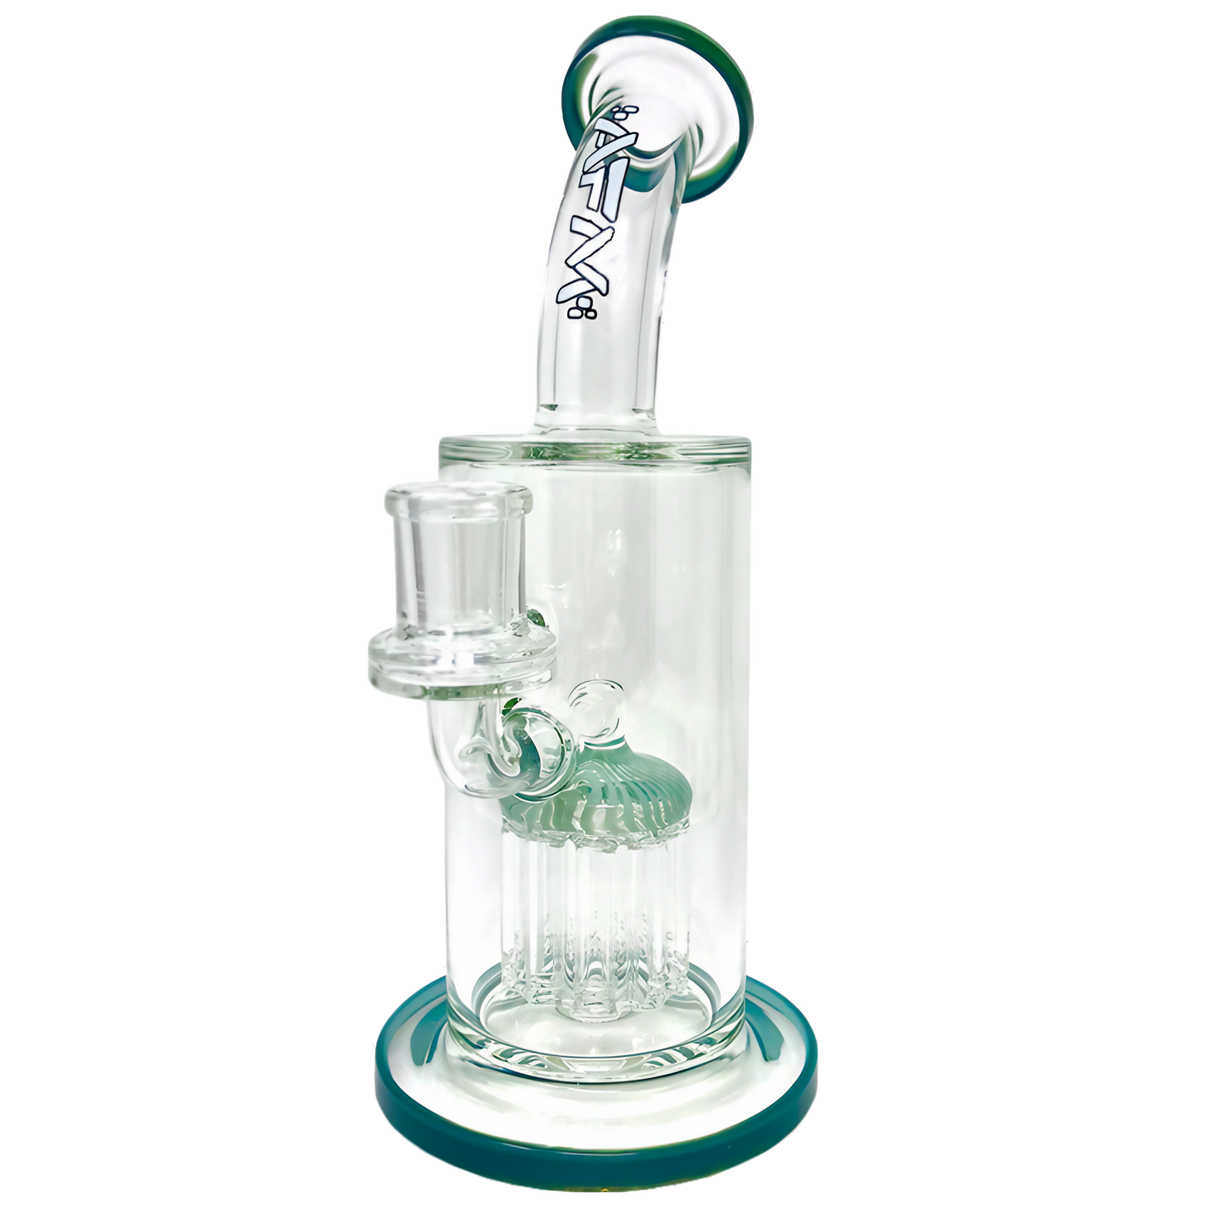 AFM Glass - The Groovy 10 Arm Dab Rig - 9" with Hammer Head Percolator - Front View